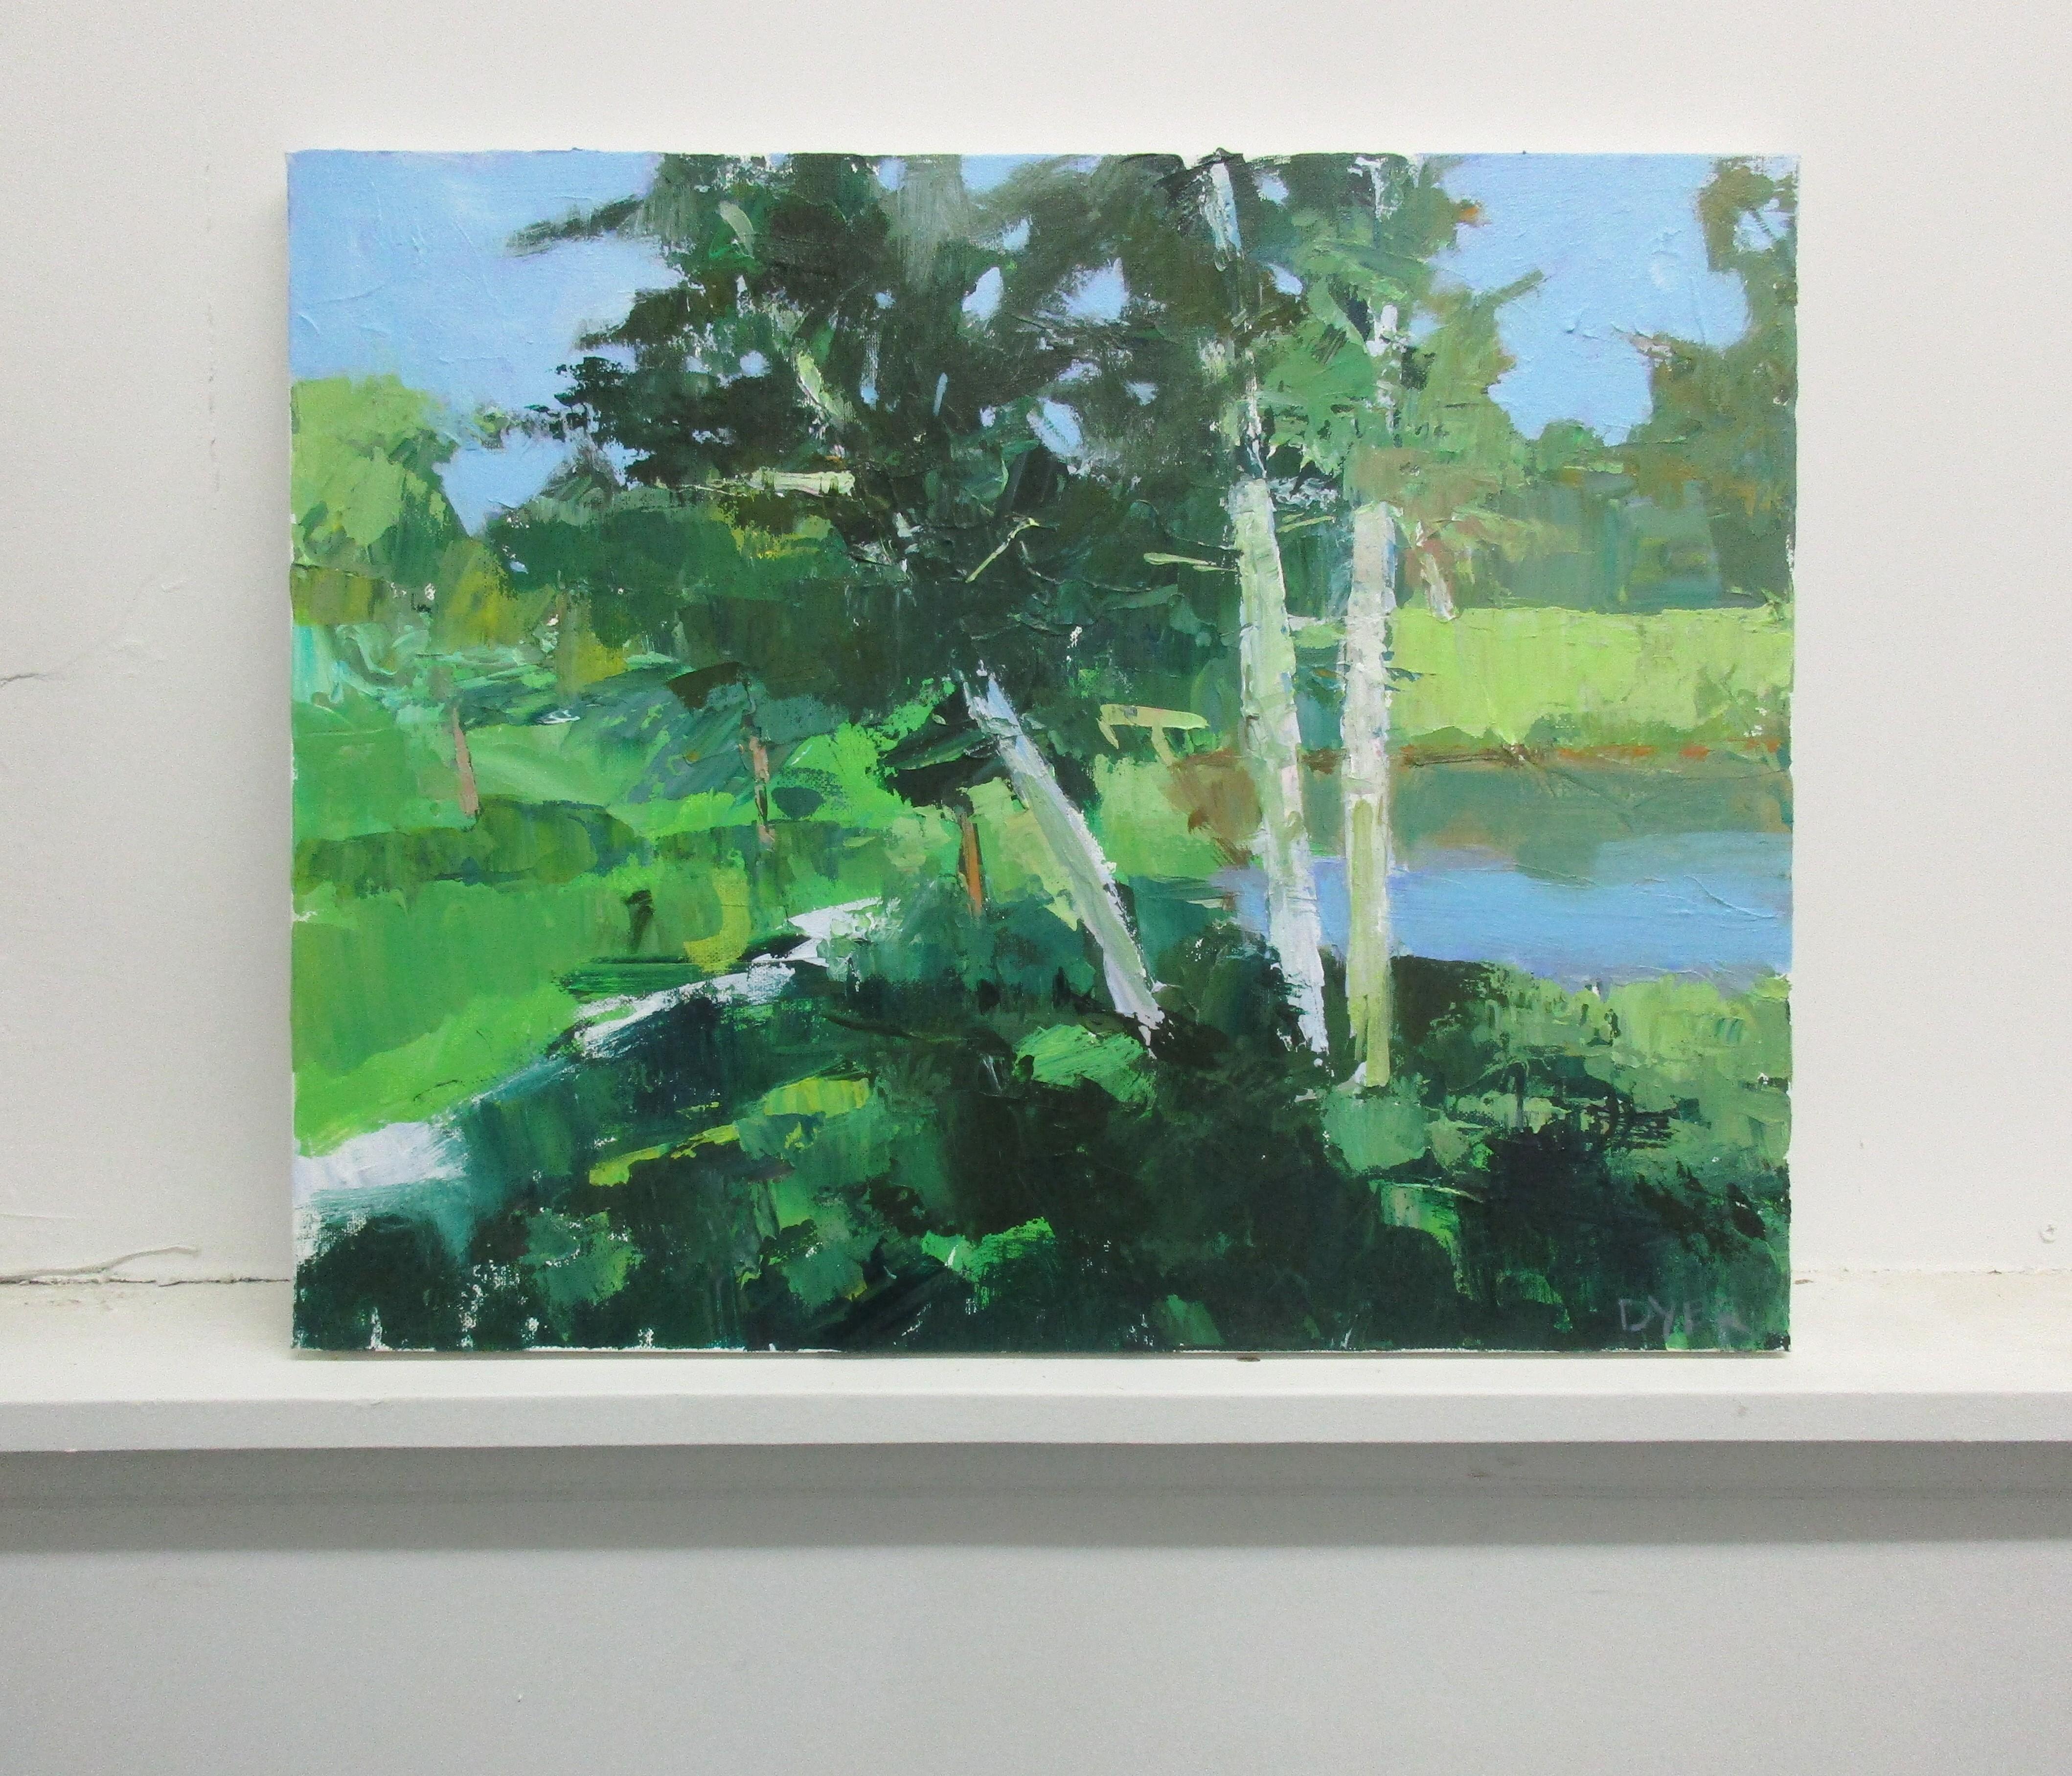 <p>Artist Comments<br />Janet says this piece was inspired by a summer trip to Vermont. She and her friends rested by the pond in the cool shade of the birch trees. The bright sunlight illuminated the landscape in many rich shades of green.</p><br